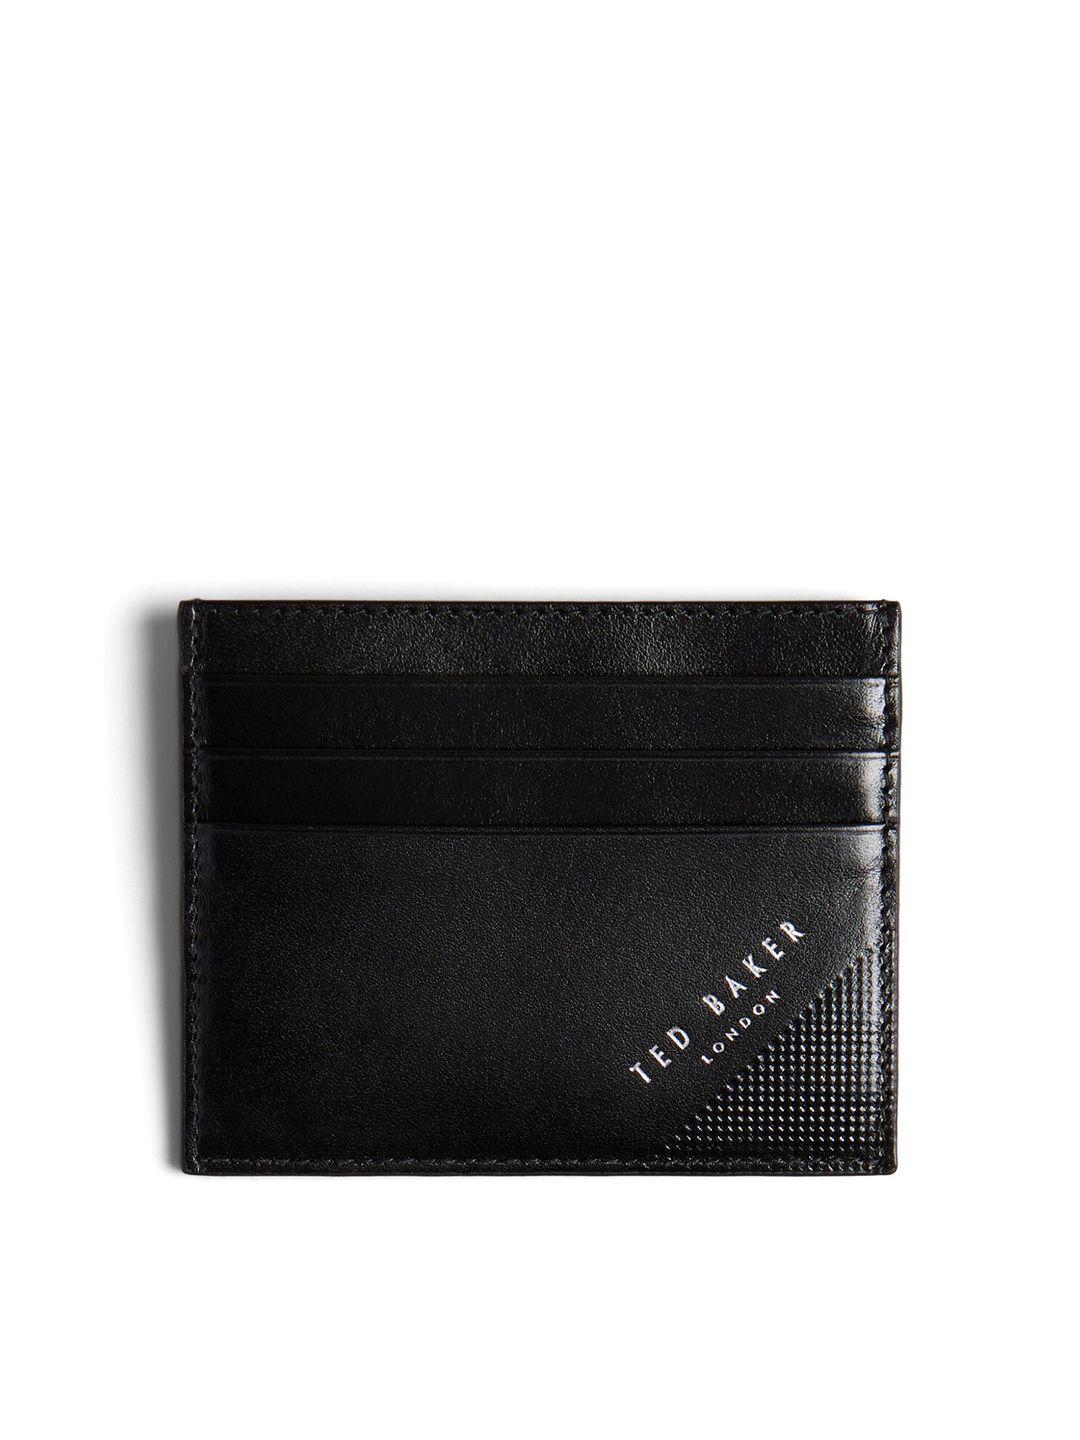 ted baker men leather two fold wallet